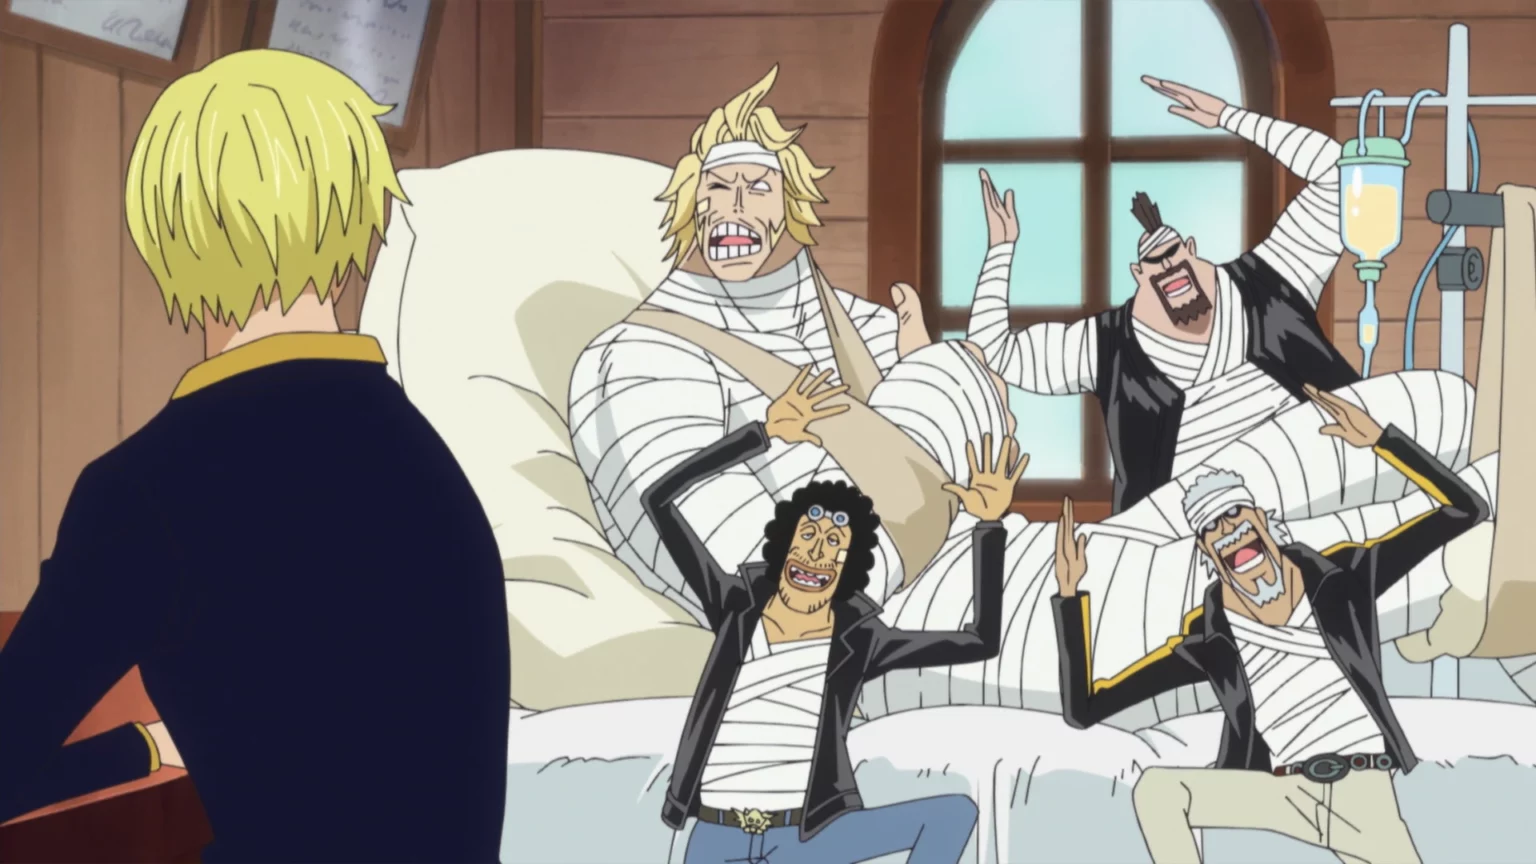 Duval in One Piece, all bandaged up after his heroic actions to save the Straw Hats